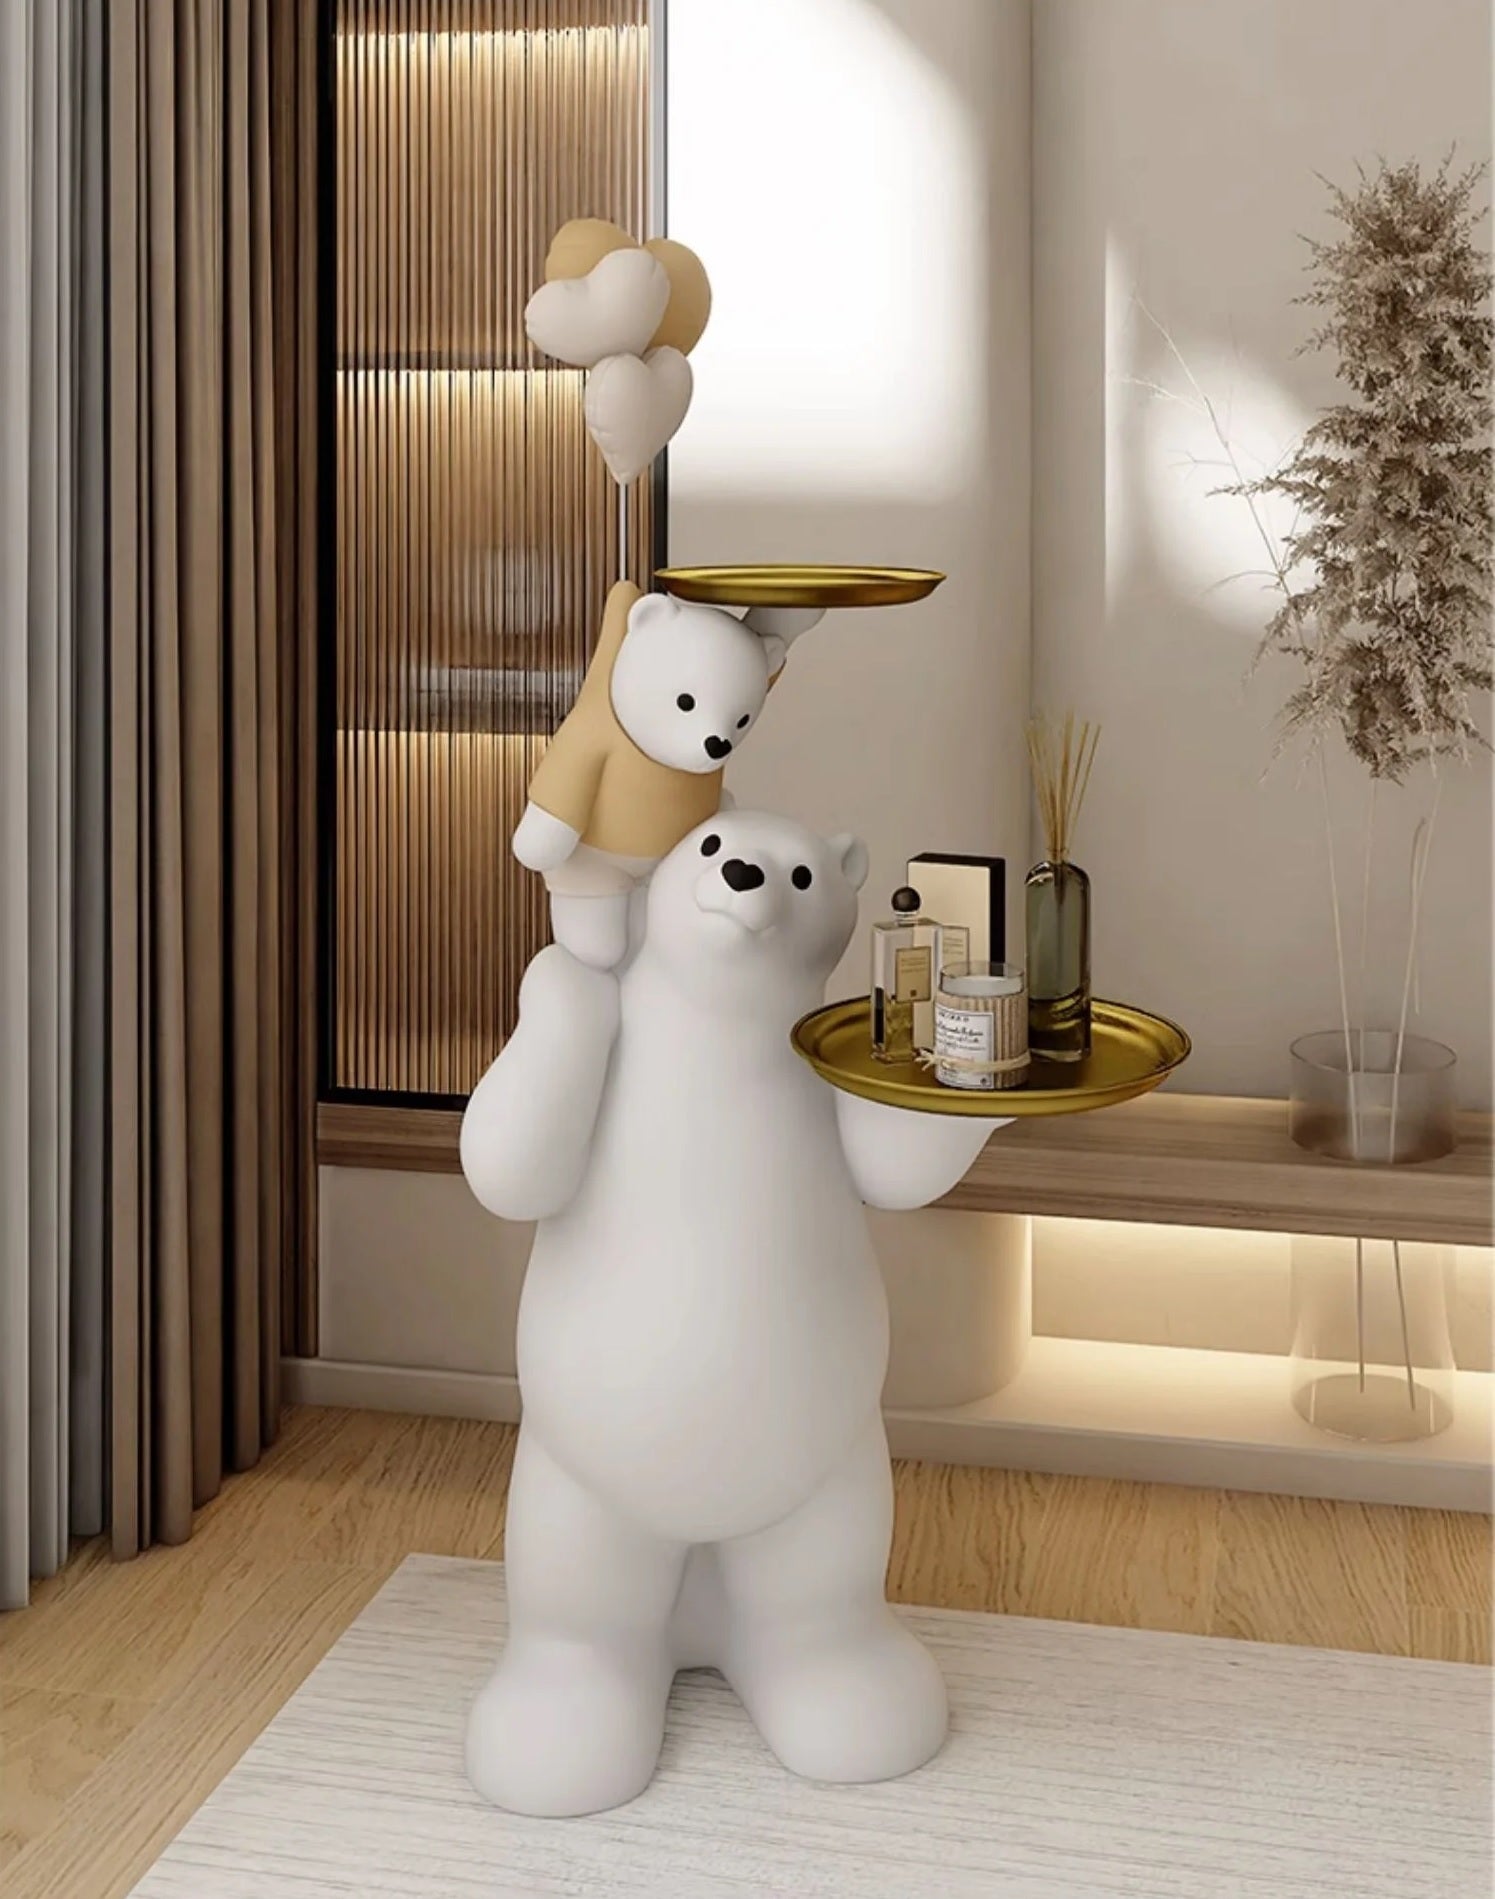 Decorative figurines of bears in a modern living room, with one bear holding a tray acting as a bear theme coffee table, another smaller bear balancing on the first bear’s head holding a balloon.